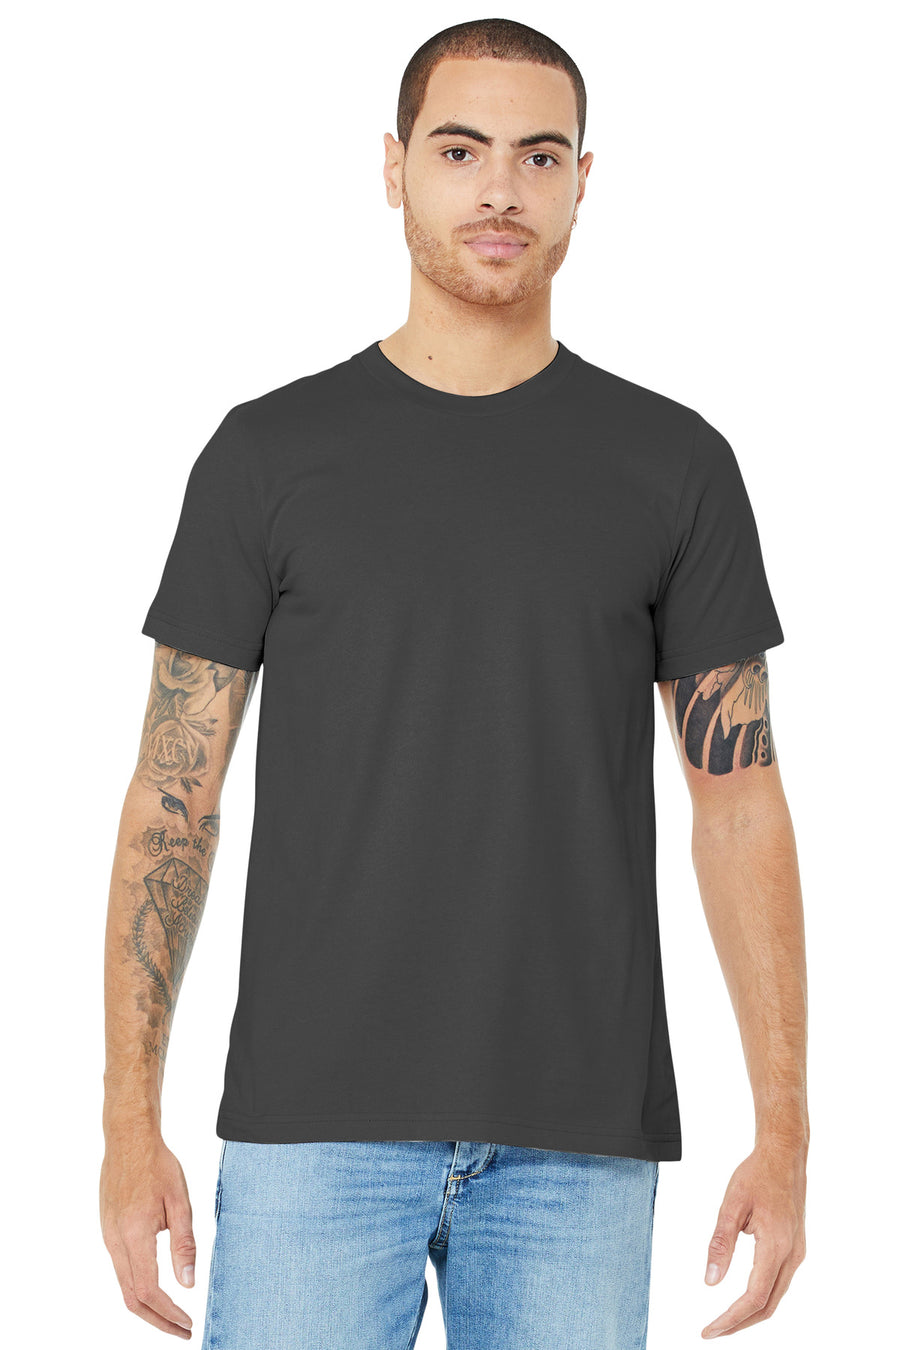 BELLA+CANVAS ® Unisex Jersey Short Sleeve Tee. BC3001 – On Game Day